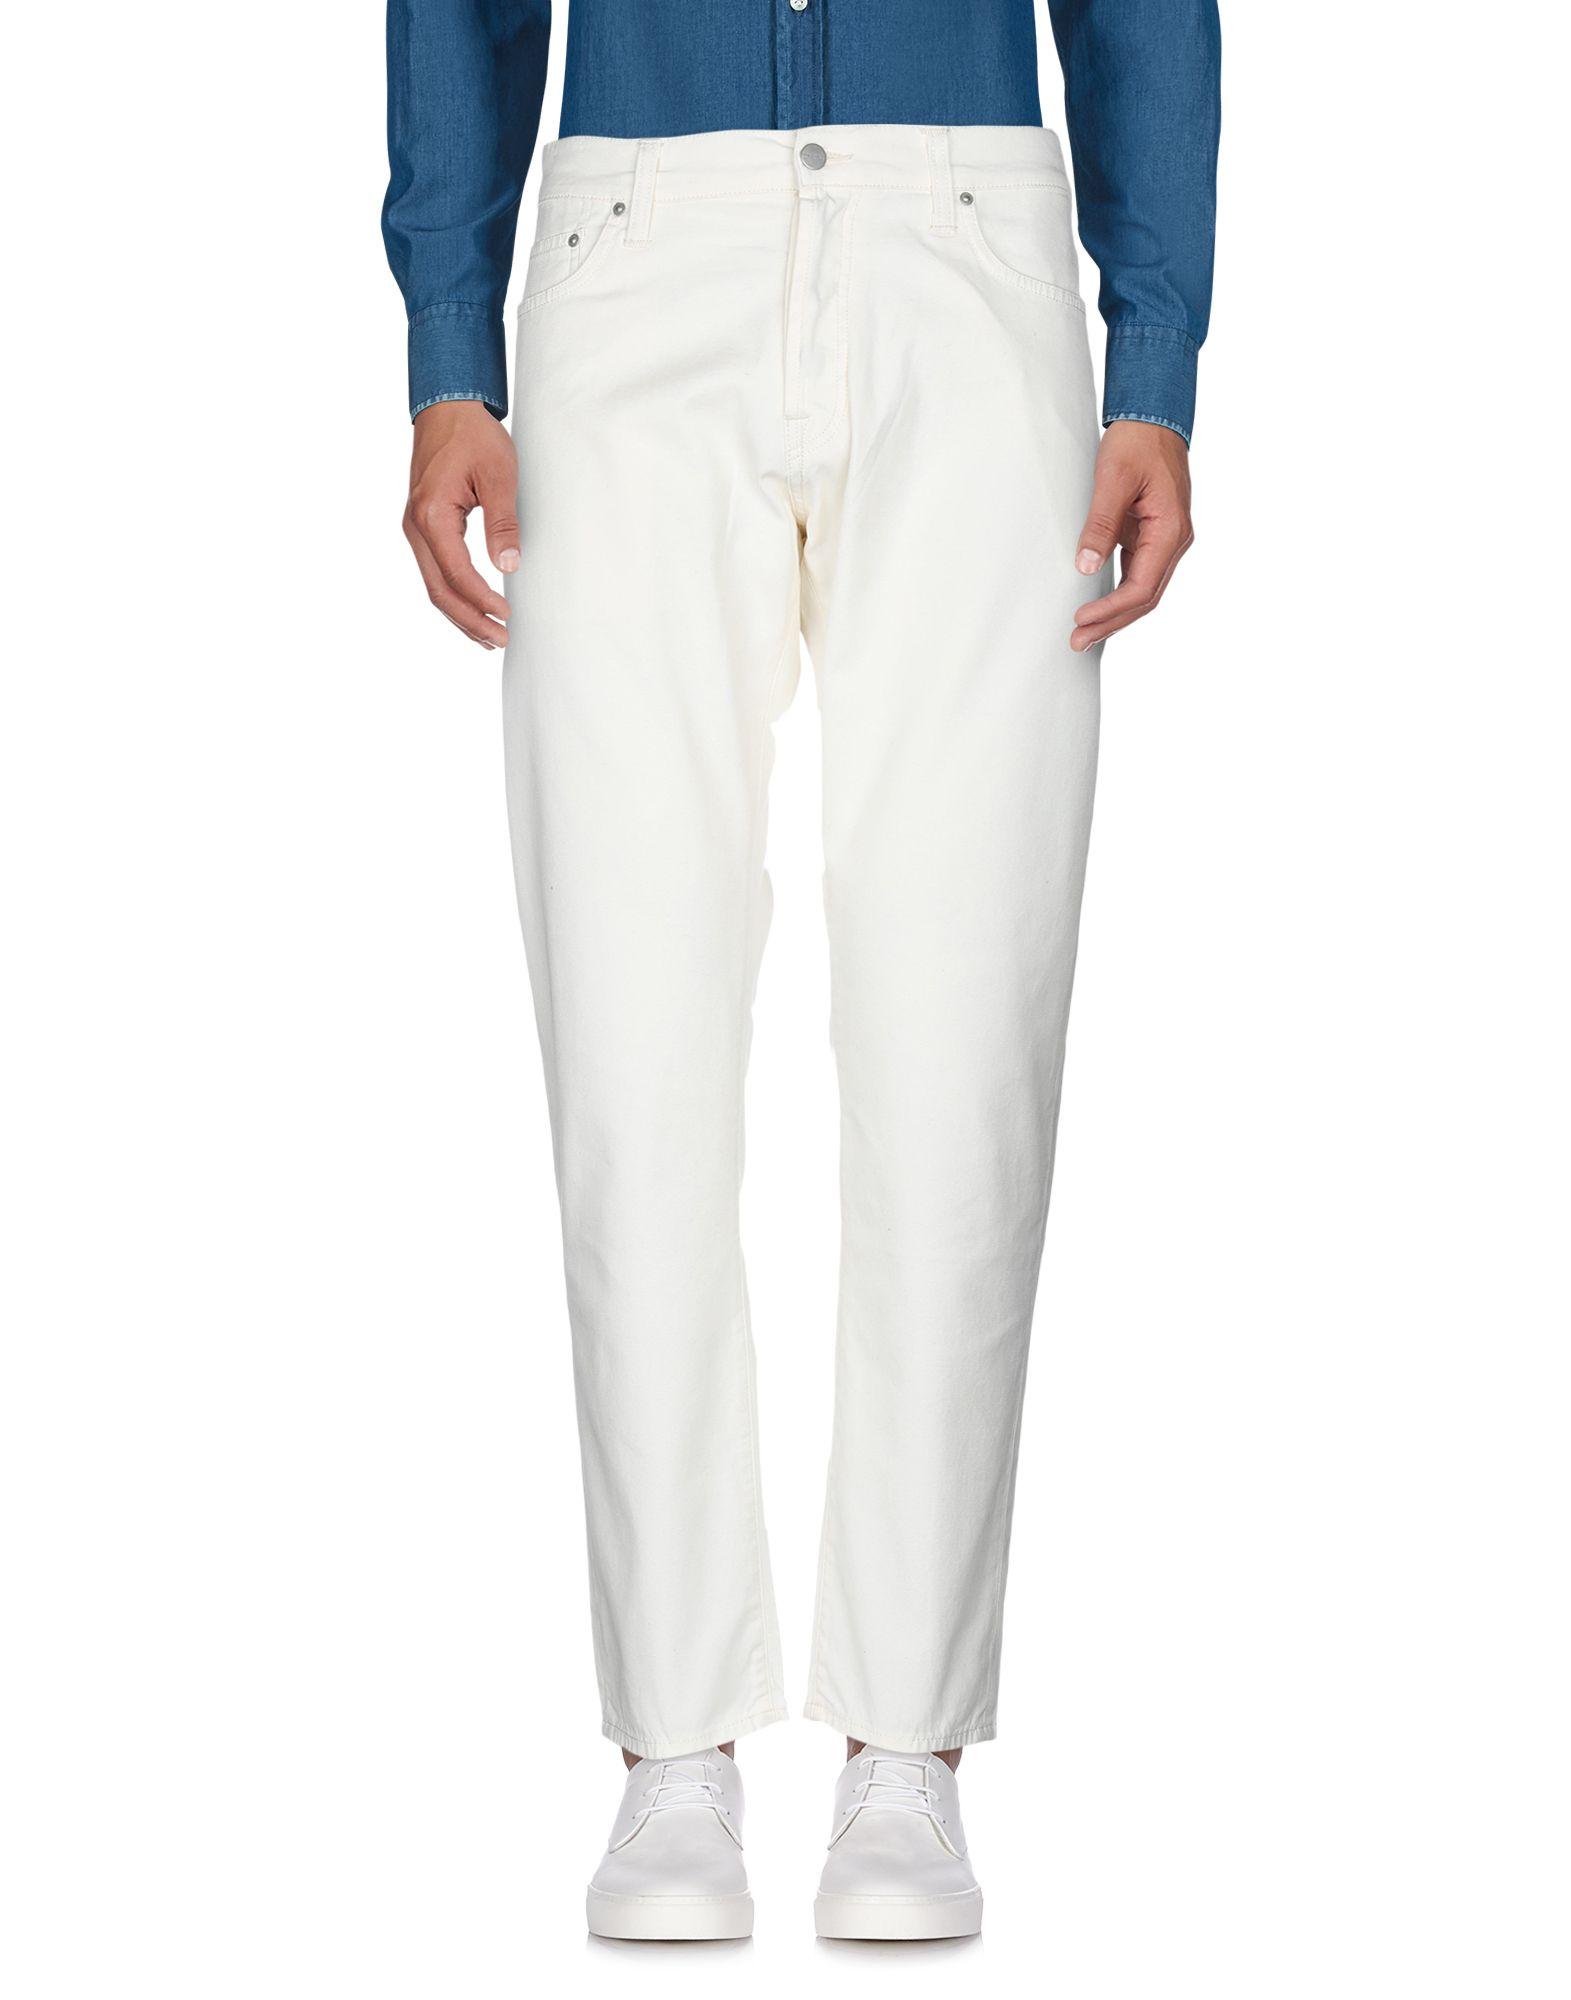 Carhartt Canvas Casual Pants in Ivory (White) for Men - Lyst